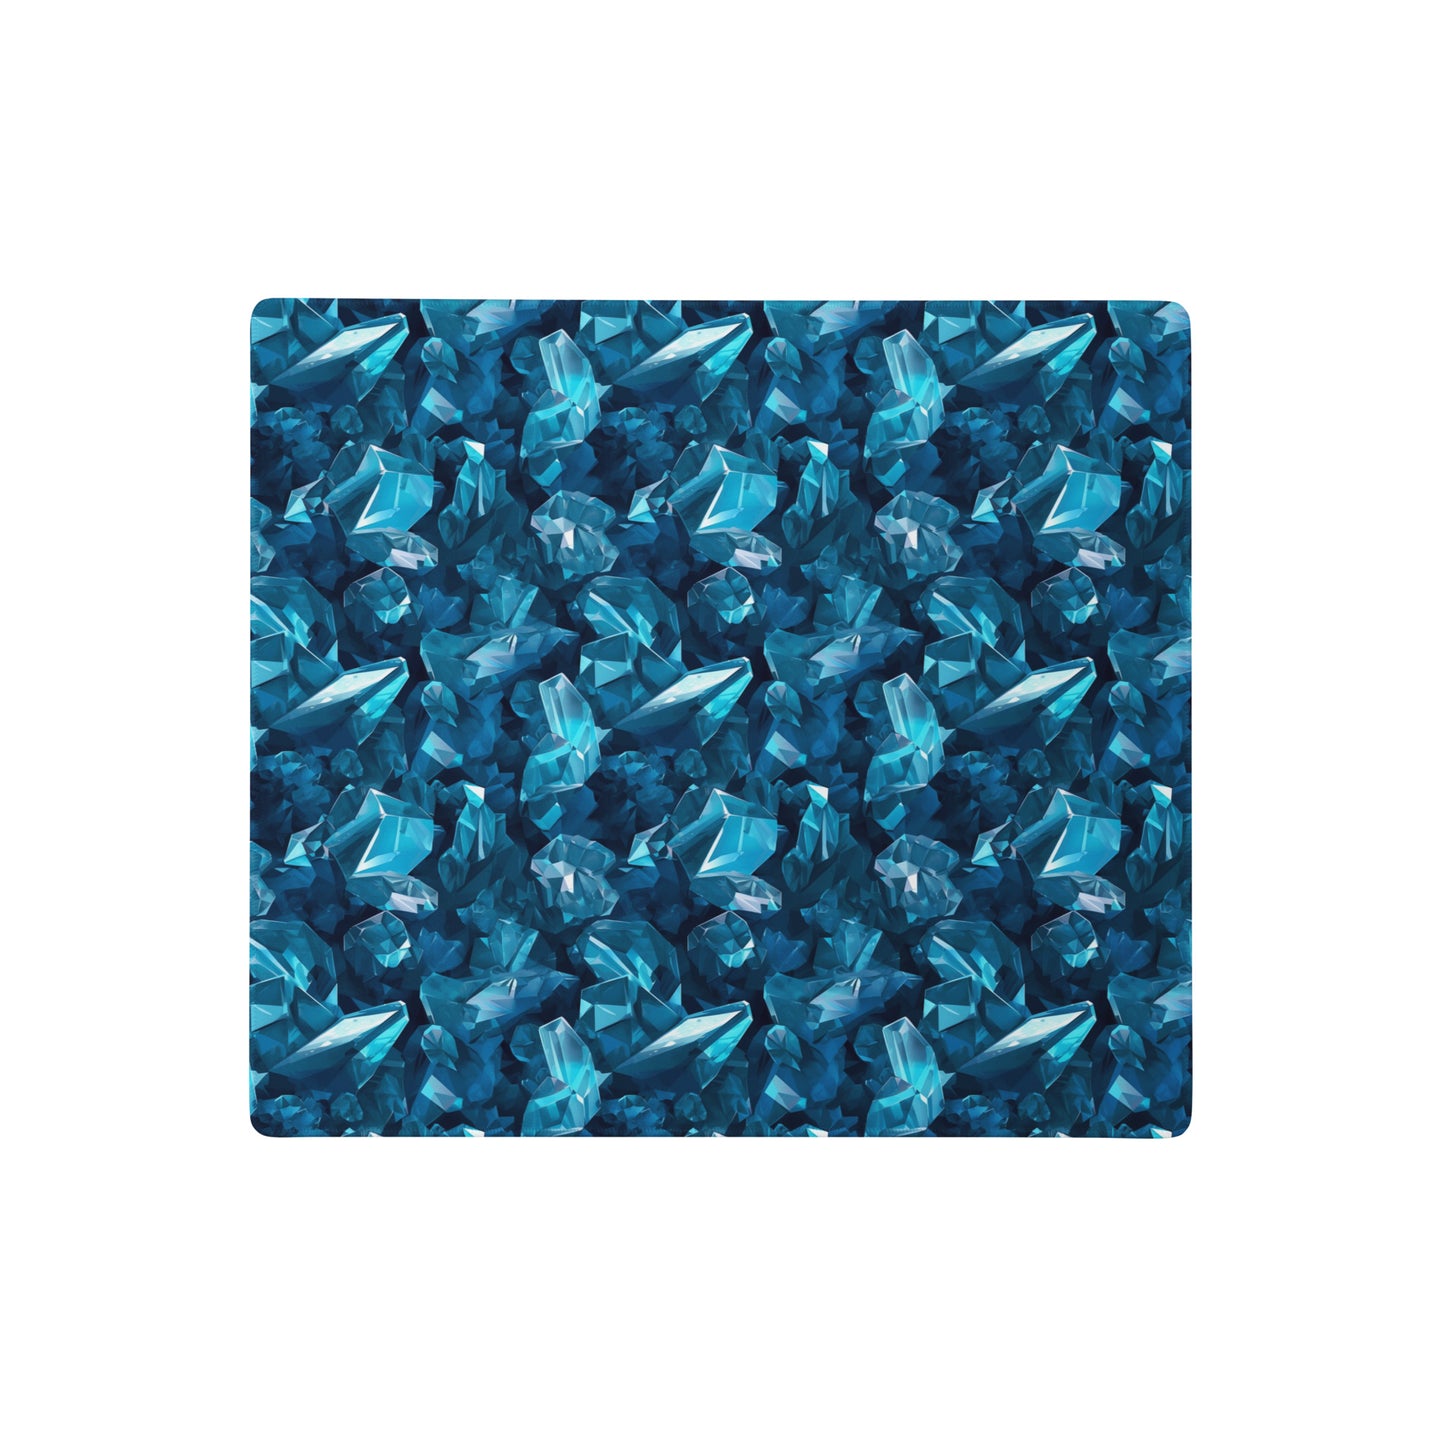 An 18" x 16" gaming desk pad with blue crystals.